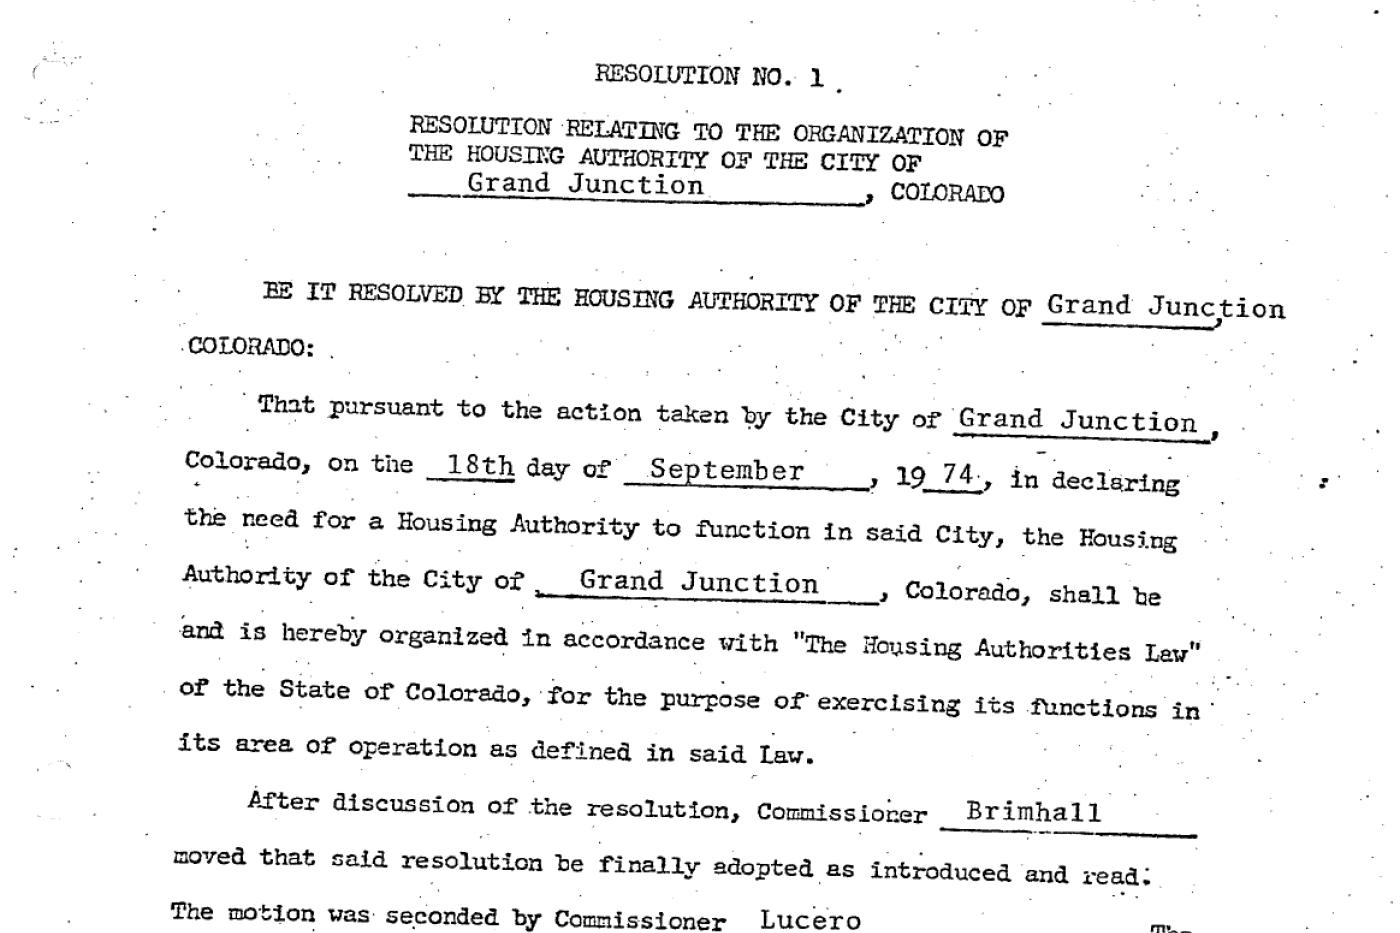 Photocopy of the founding resolution for the Grand Junction Housing Authority